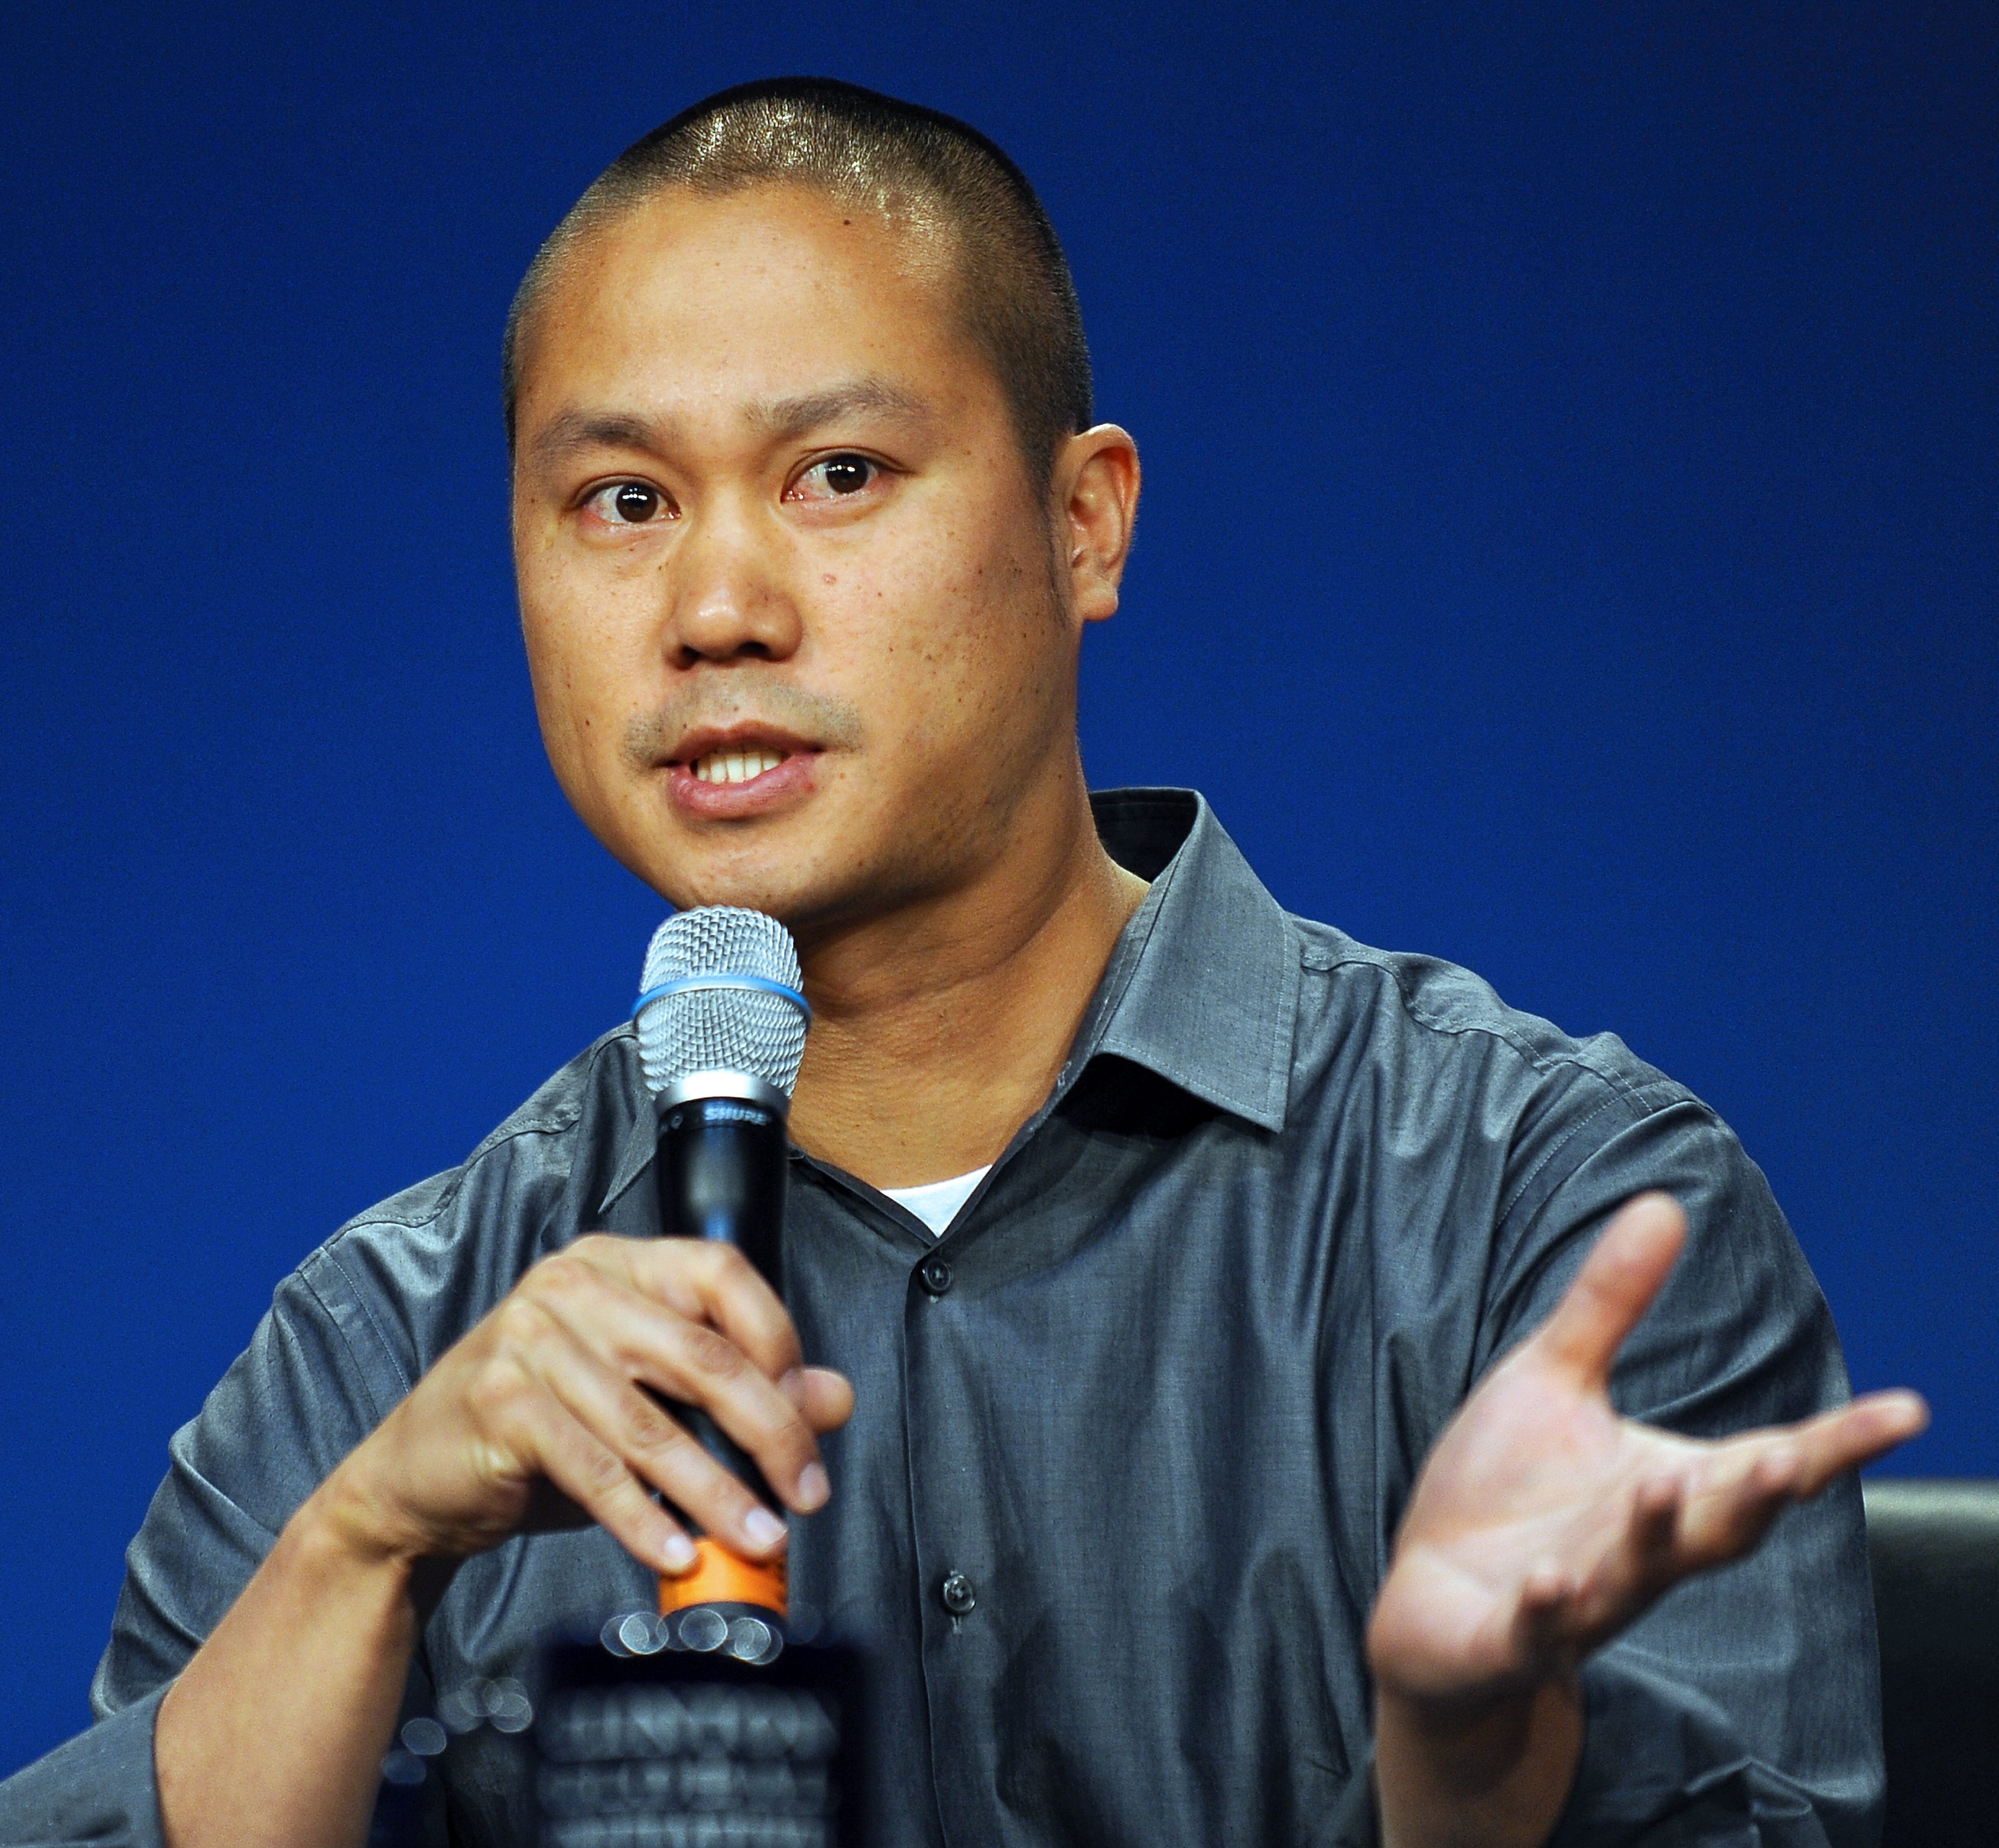 2011-06-30 09:31:22 epa02803191 Zappos.com CEO Tony Hsieh speaks during a panel discussion at the third plenary session of the Clinton Global Initiative's CGI America on examining programs that work to stimulate the economy in the US at the Sheraton Hotel in Chicago, Illinois, USA, 30 June 2011. CGI America brings together leaders from government and business to address current obstacles to economic growth in urban and rural areas. EPA/TANNEN MAURY